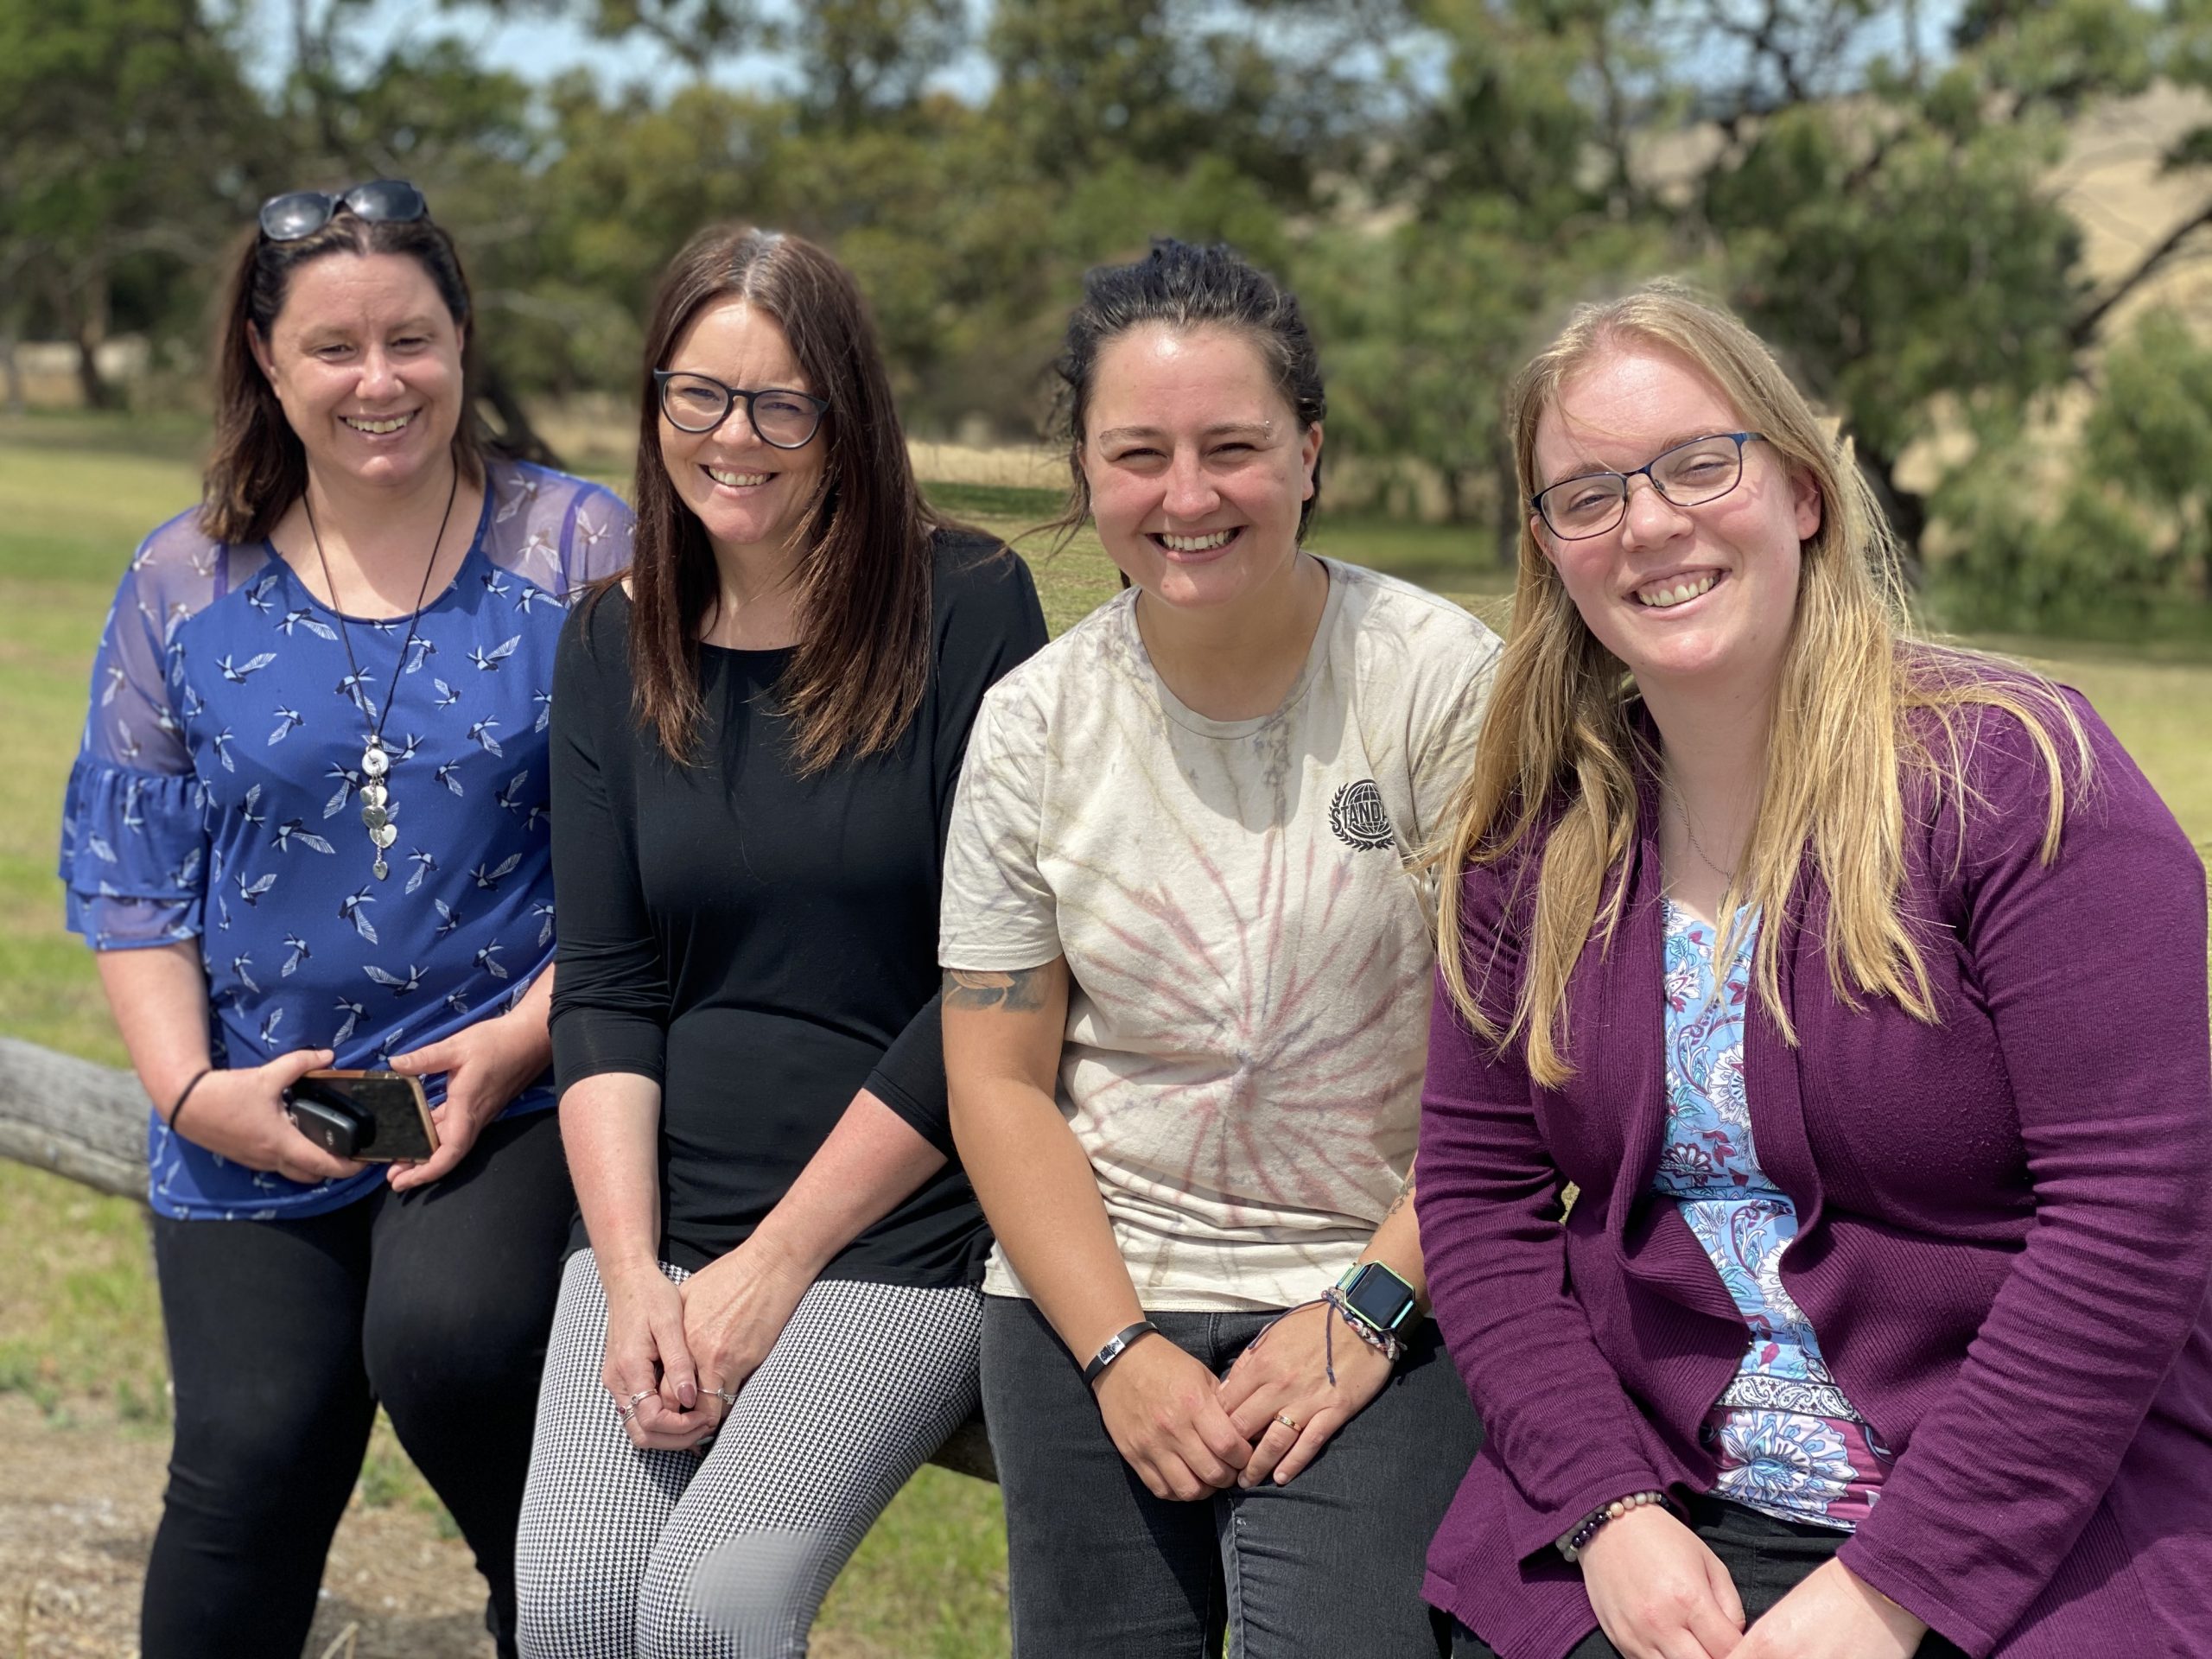 JOIN US TO CARE FOR YOUNG PEOPLE: Mount Gambier residential care home house supervisors Sherri Winter, Lynne Lambert, Maddy Fry and Caroll Saunders are leading a recruitment campaign to attract more residential care workers to support young people.